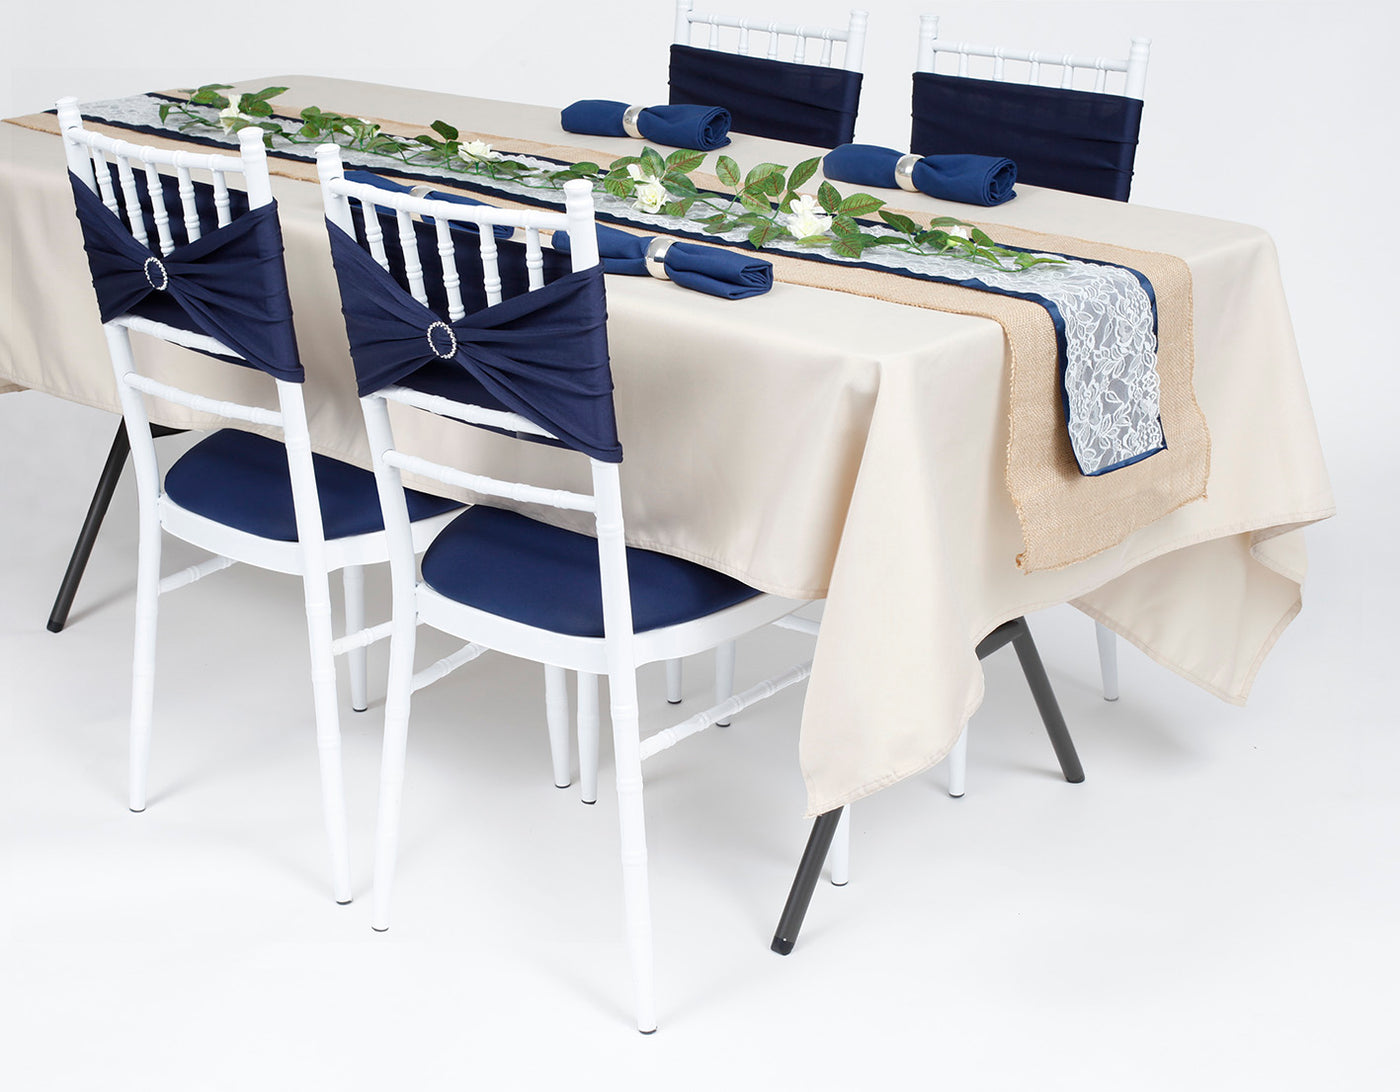 Navy, hessian and linen wedding dining setting